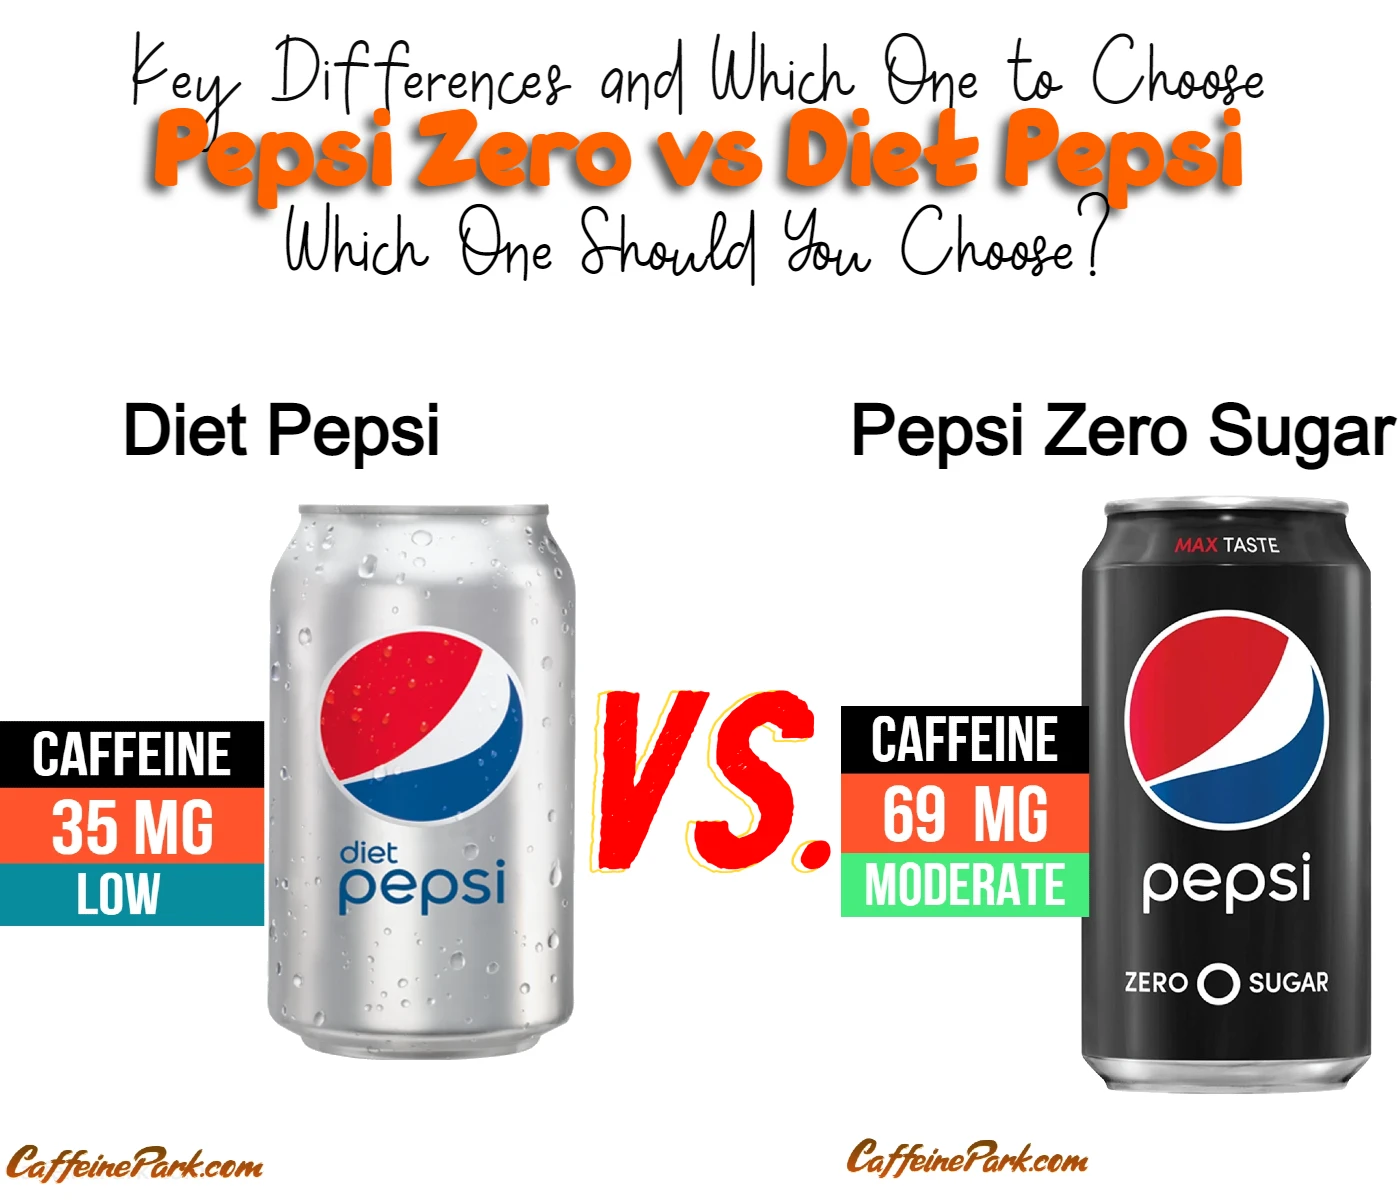 whats the difference between diet pepsi and pepsi zero?